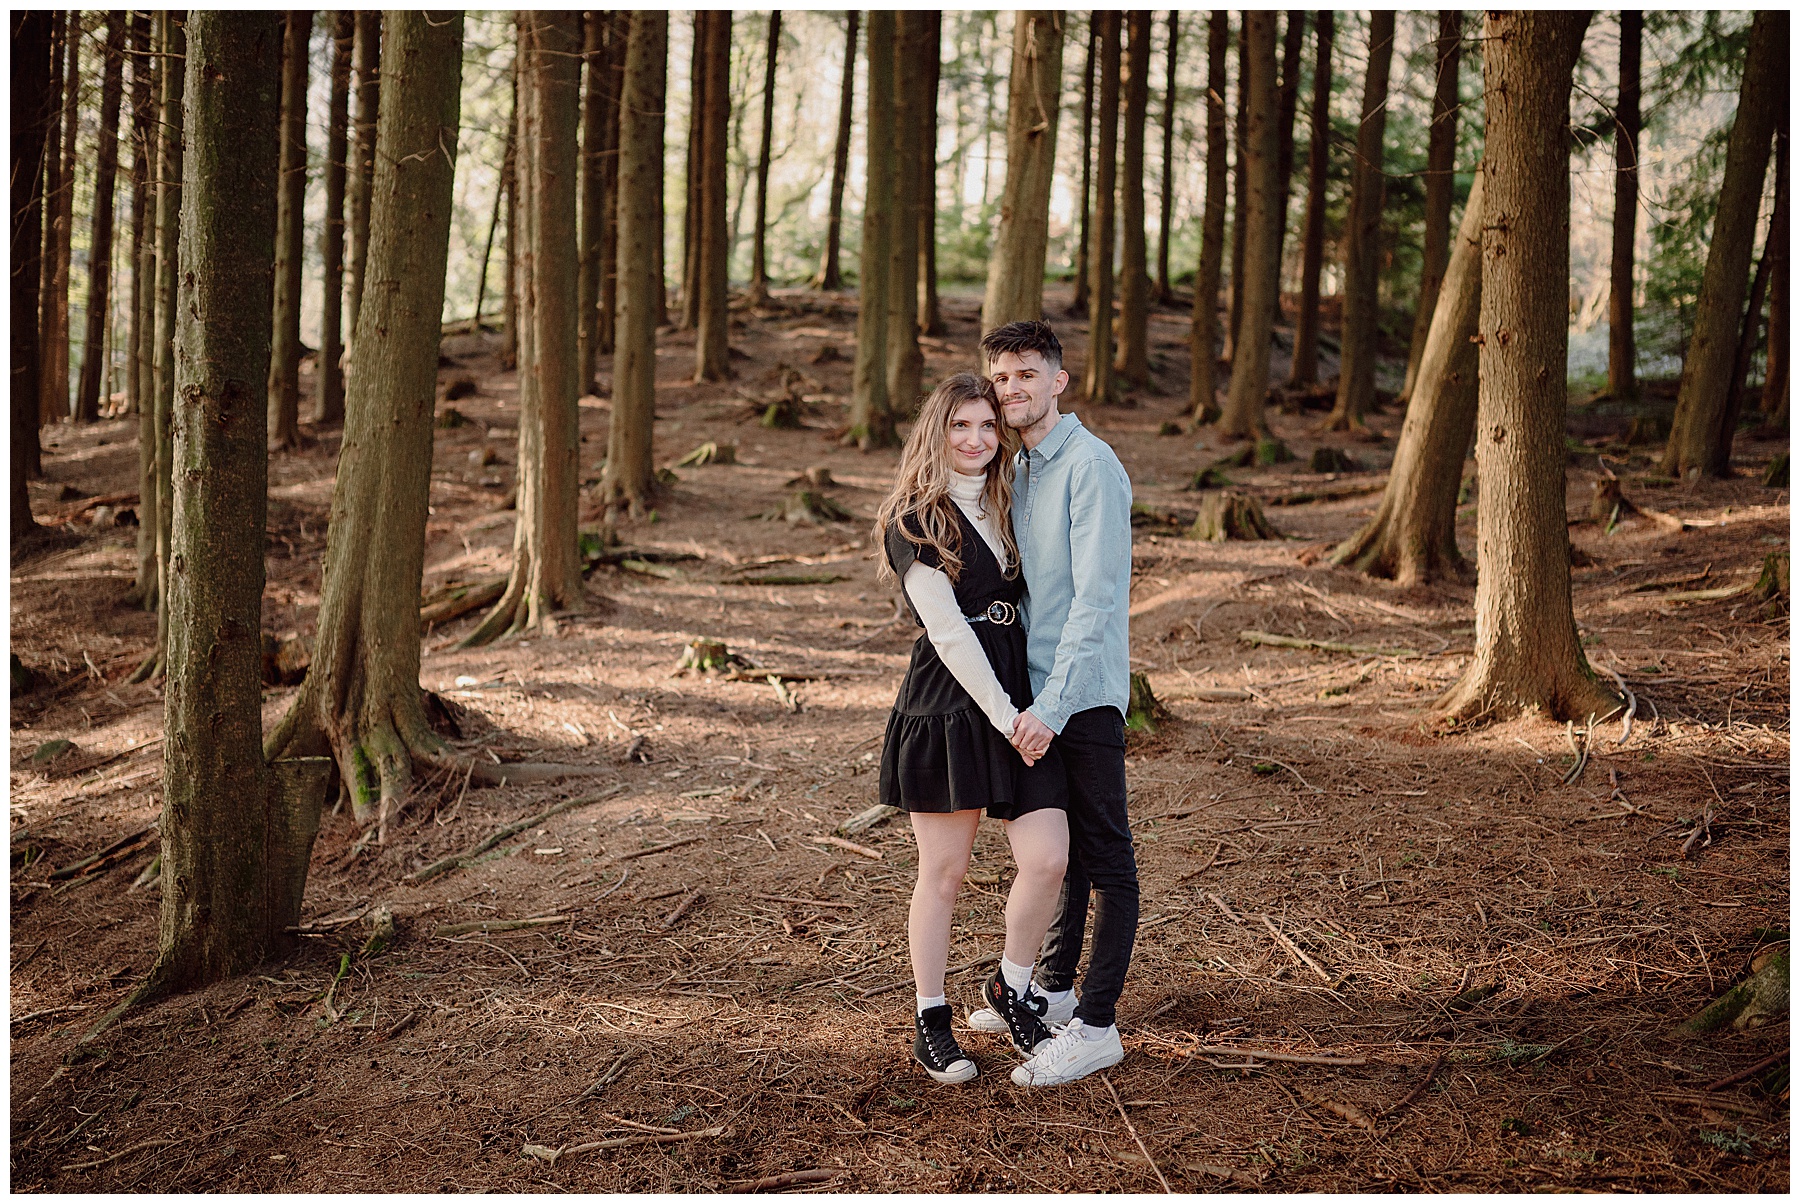 Exploring the Woodland on Afan Forest Engagement Shoot